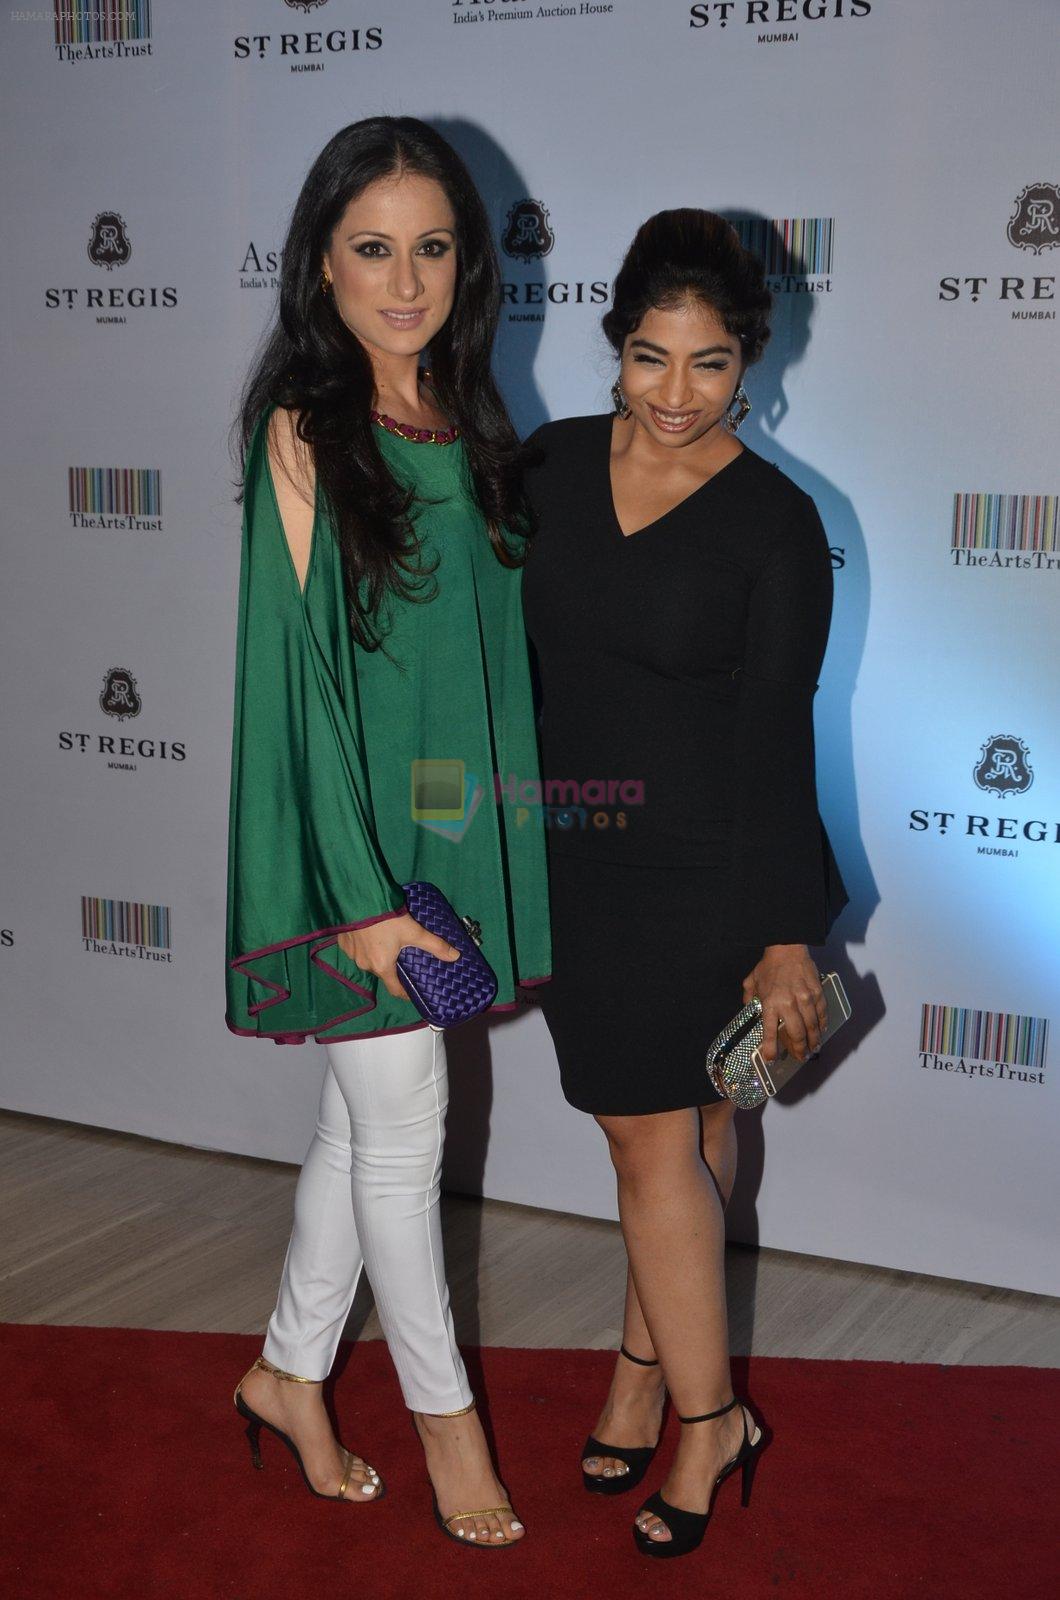 Rouble Nagi at Jogen Chaudhry's art event hosted by Gayatri Ruia and ST Regis on 10th June 2016